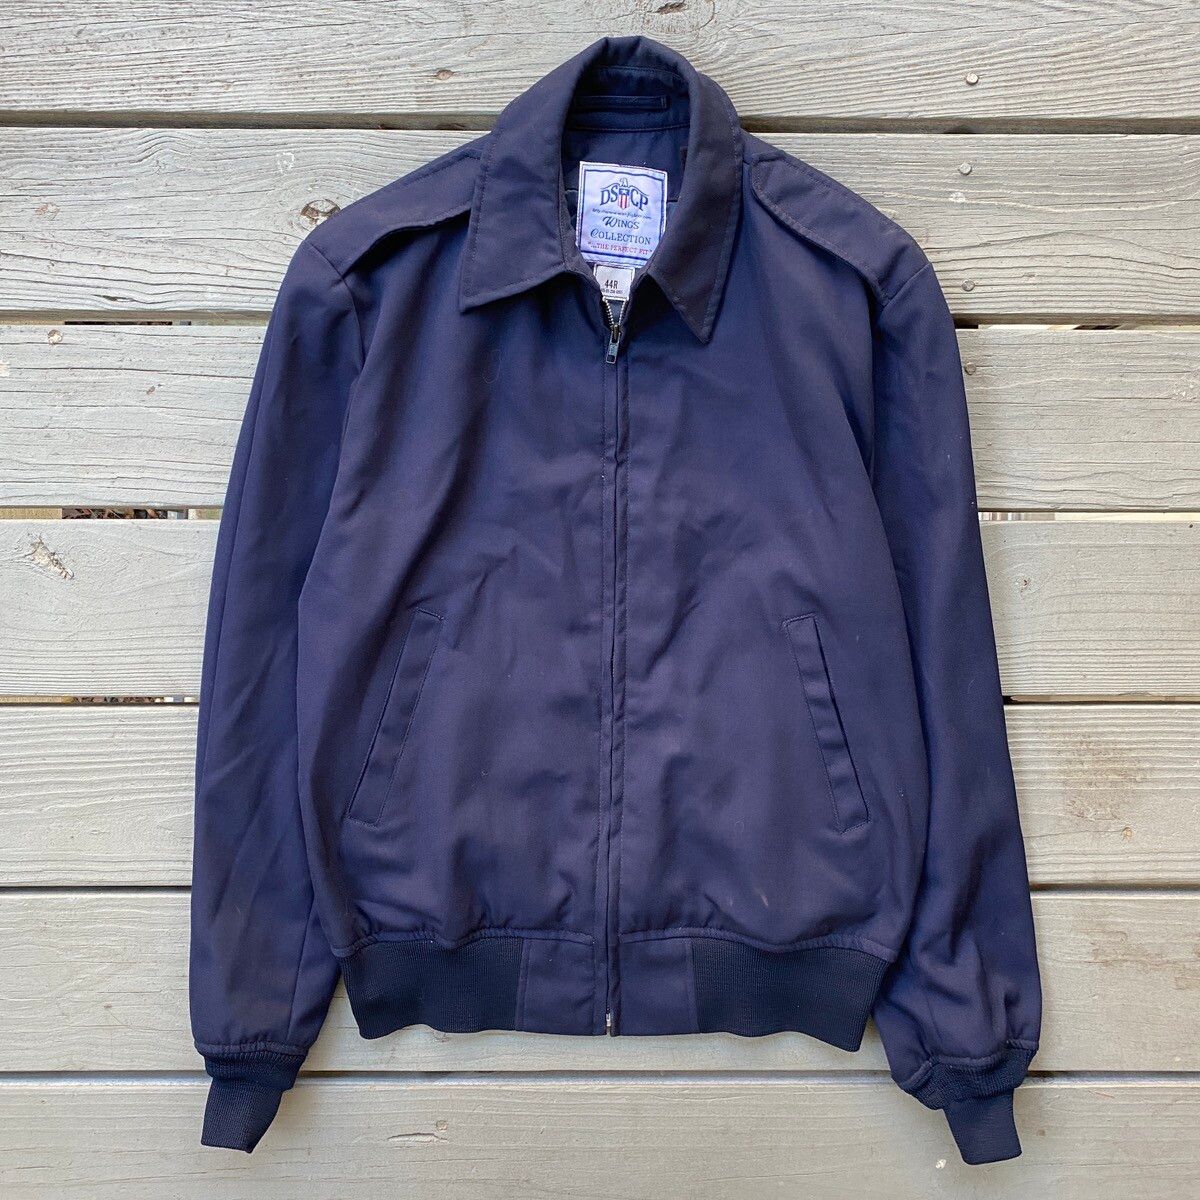 Vintage DSCP Wings Collection 90's Bomber Navy Jacket | Grailed